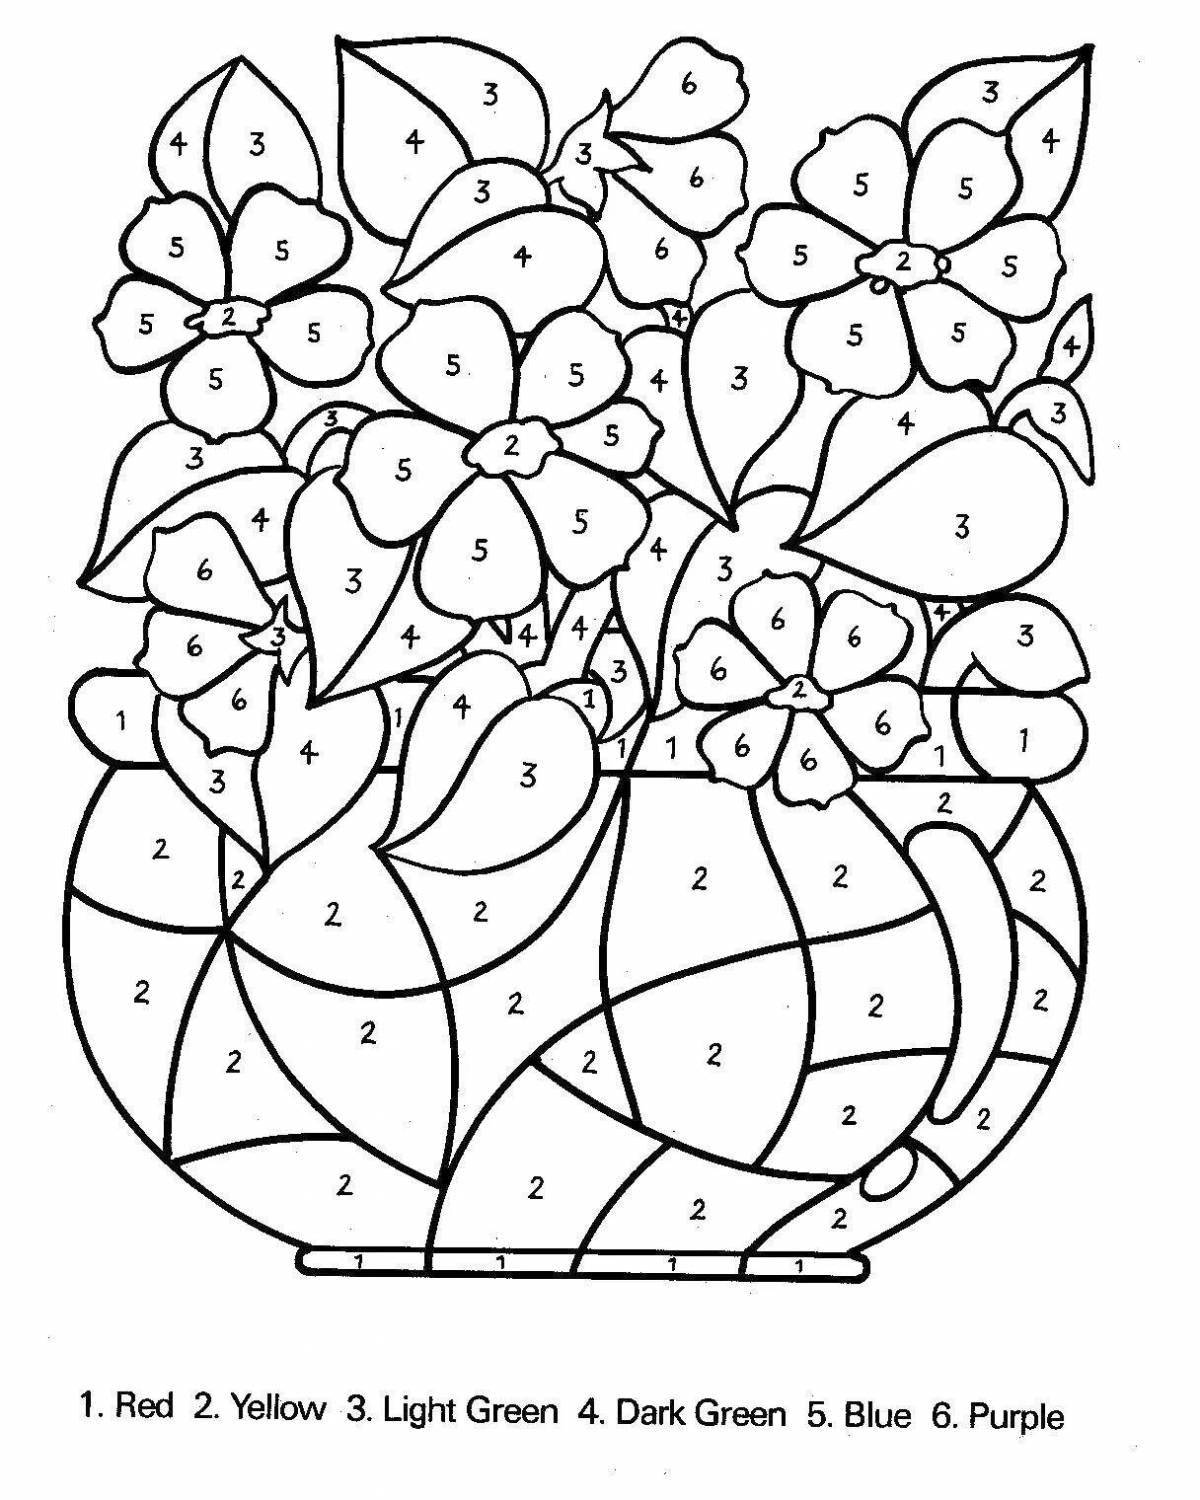 Color-explosion coloring page by squares with numbers